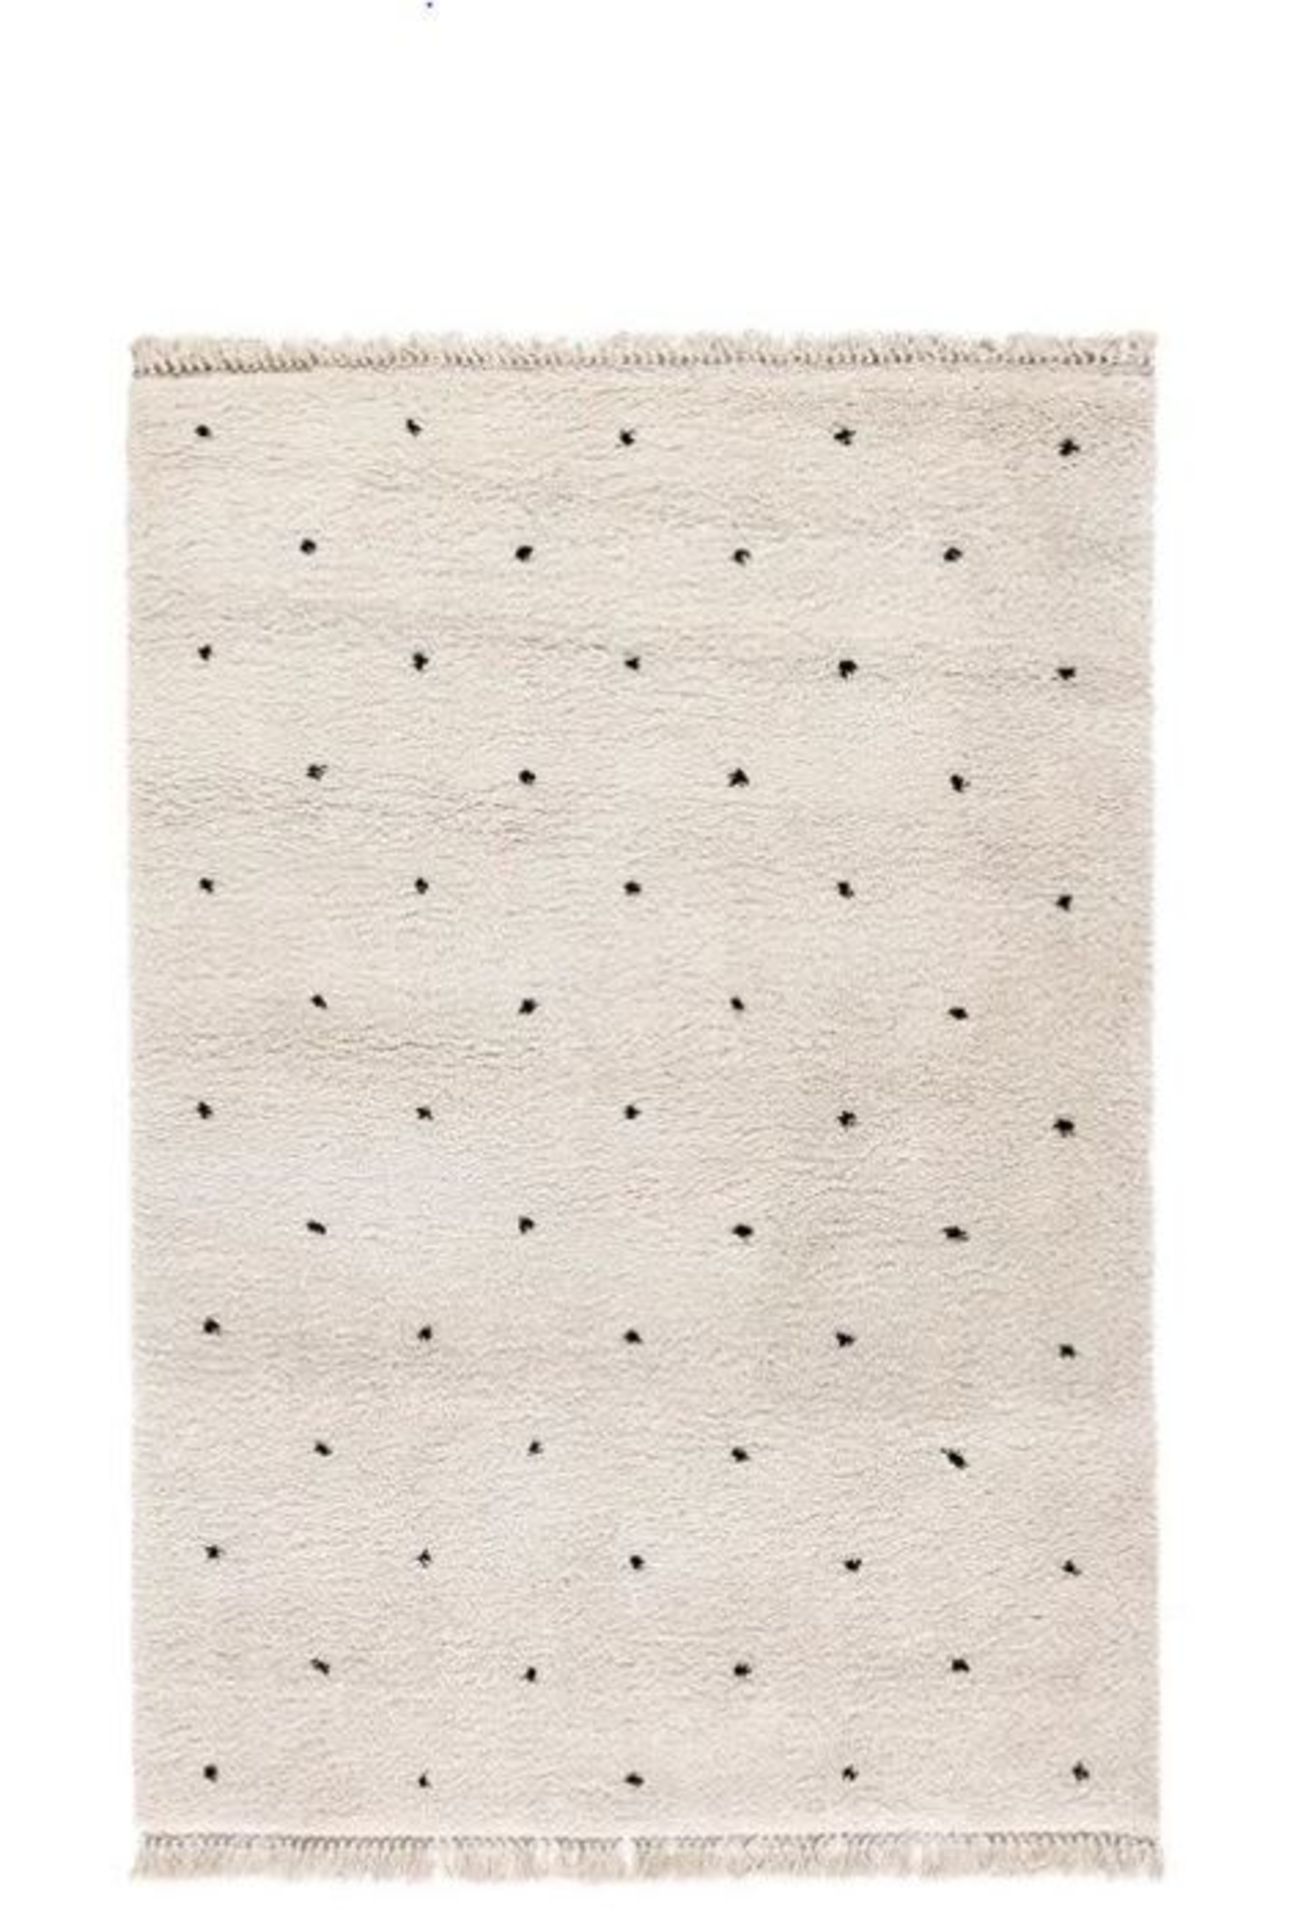 LA REDOUTE AVA SPOTTED BERBER-STYLE RUG / SIZE: 200 X 290CM